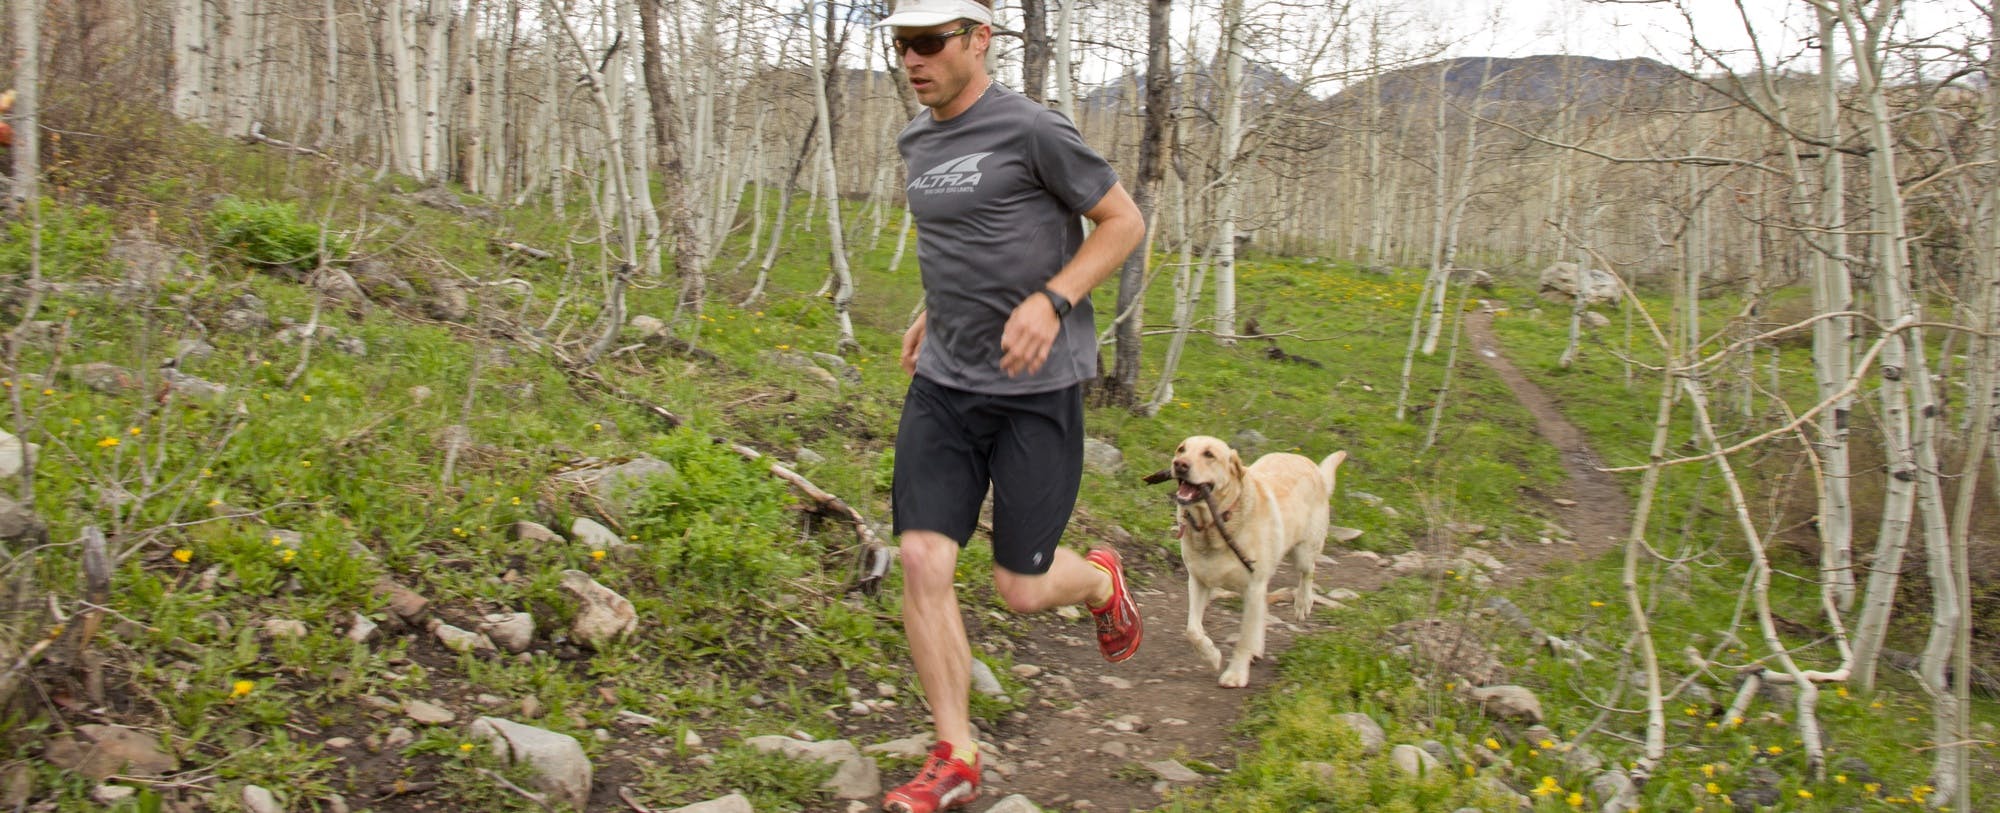 Five Reasons I Trail Run With My Dog